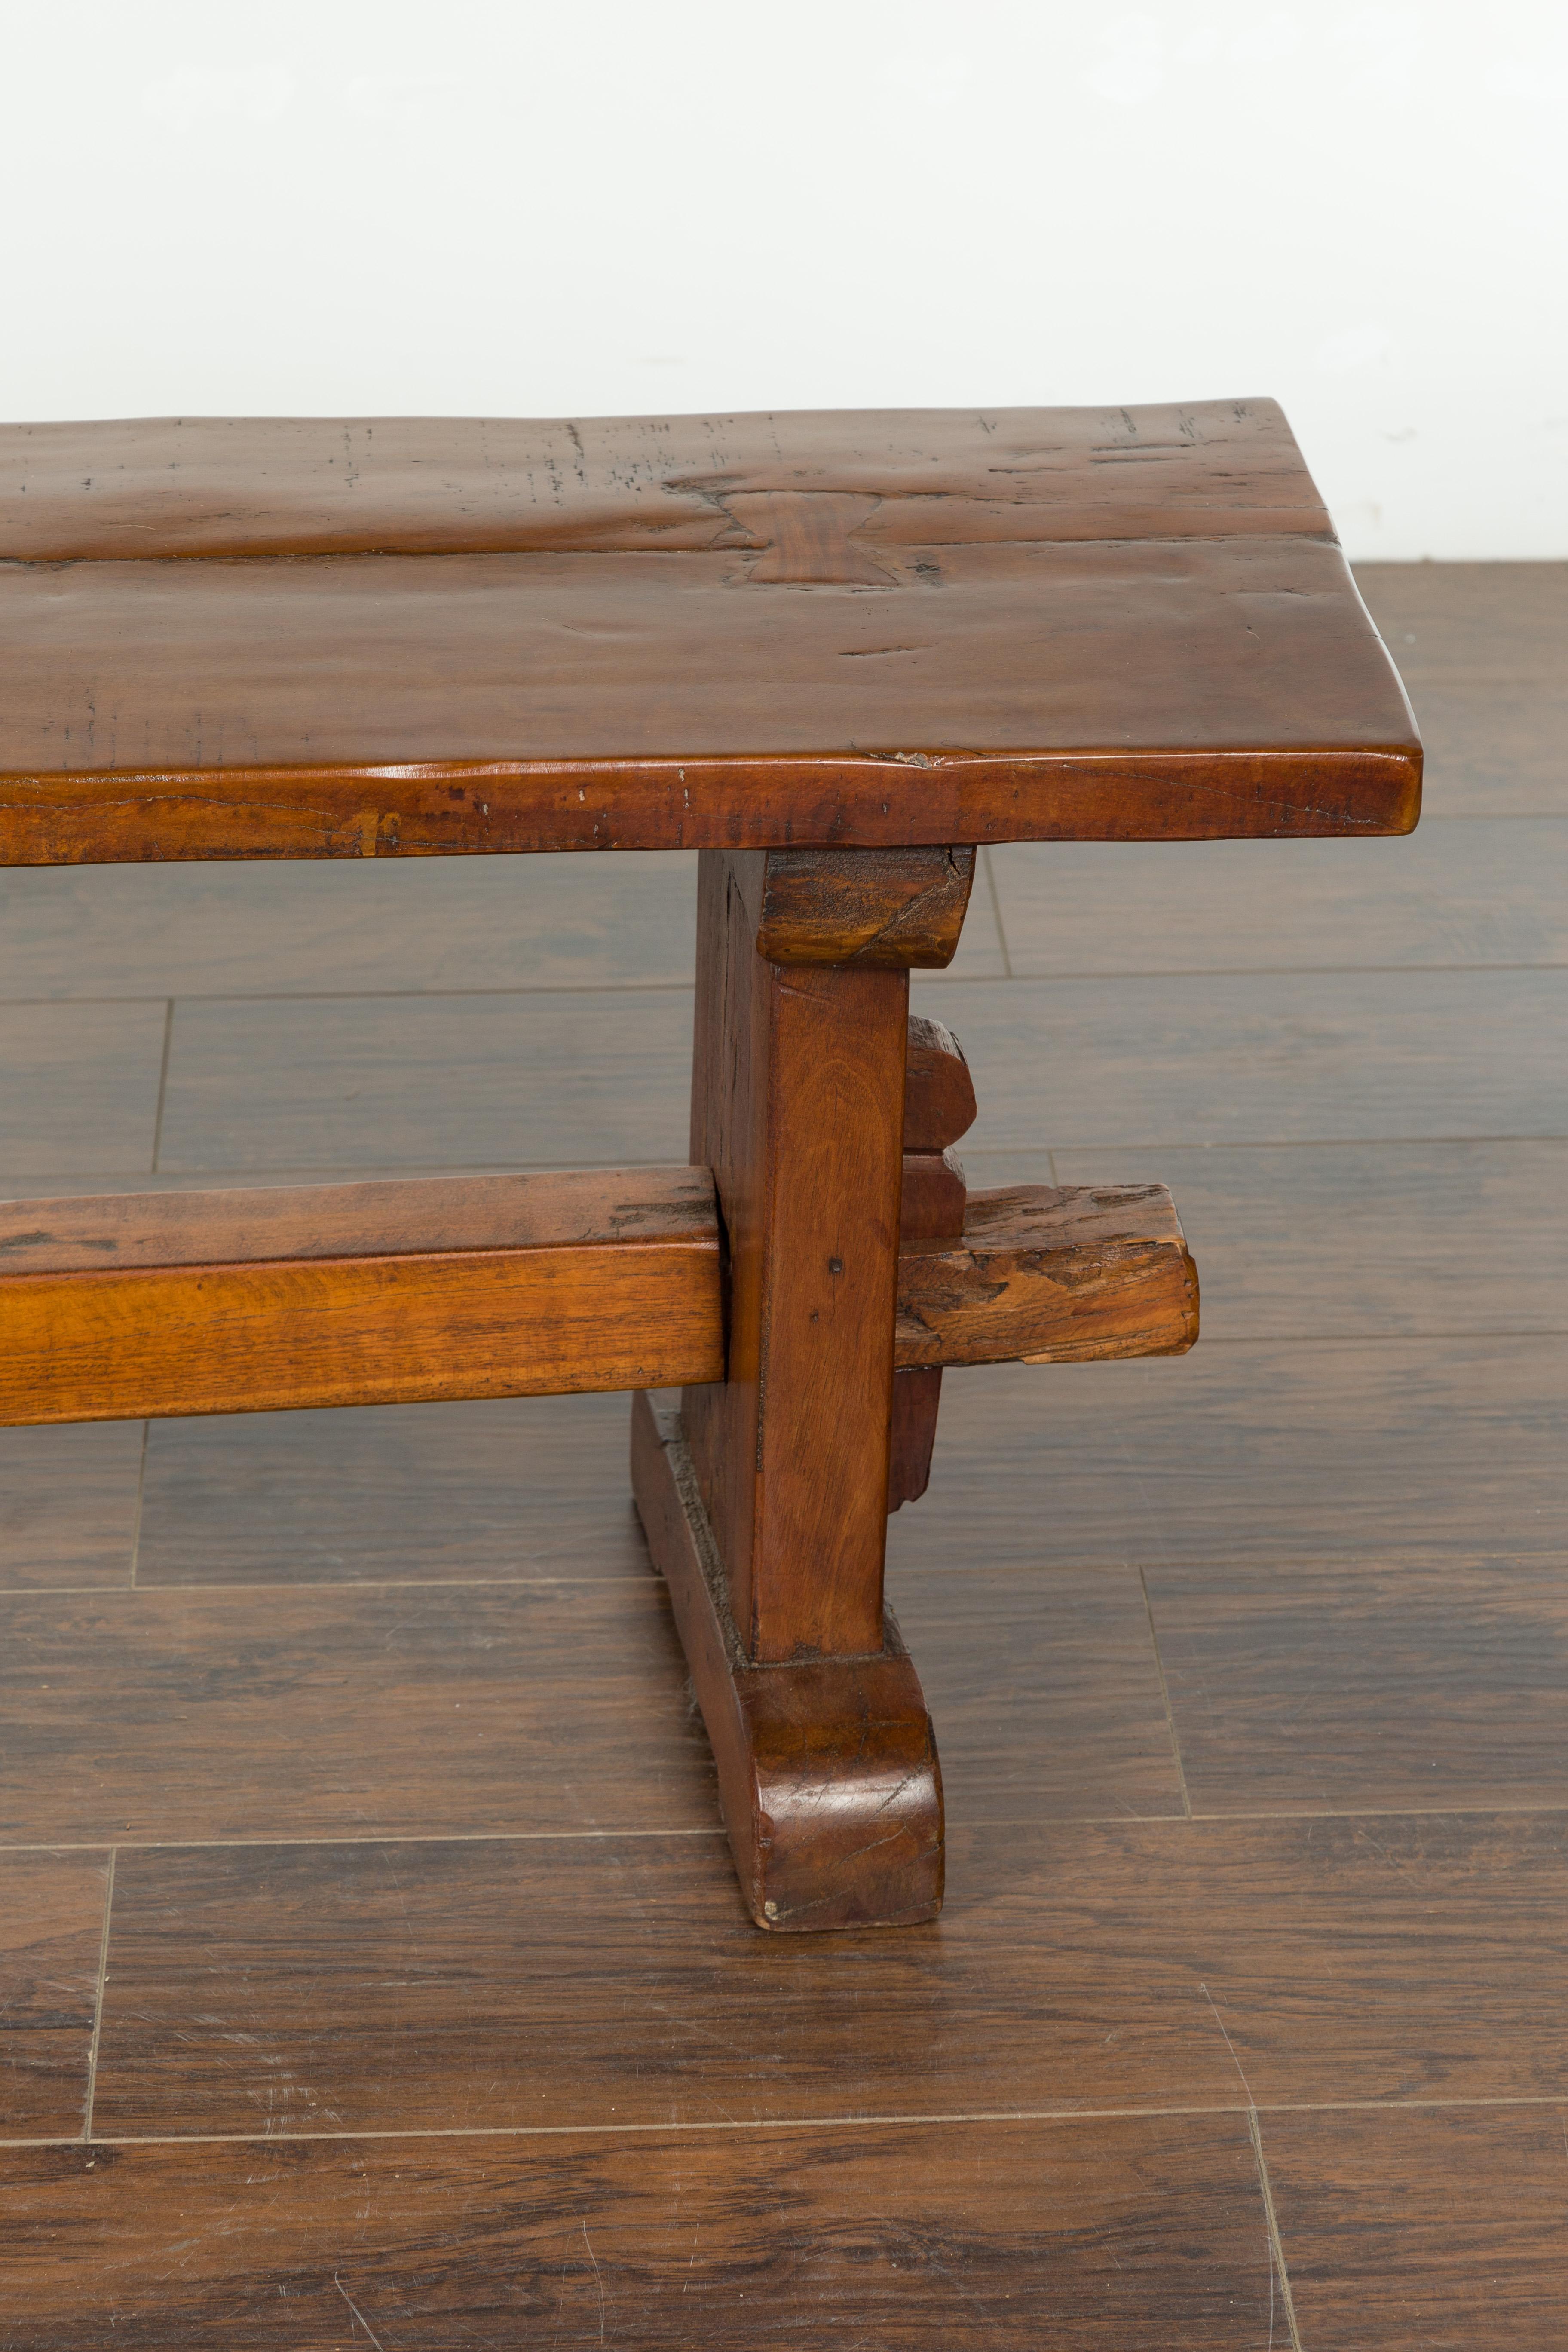 Rustic Italian Walnut Bench with Trestle Base from the Early 19th Century 7